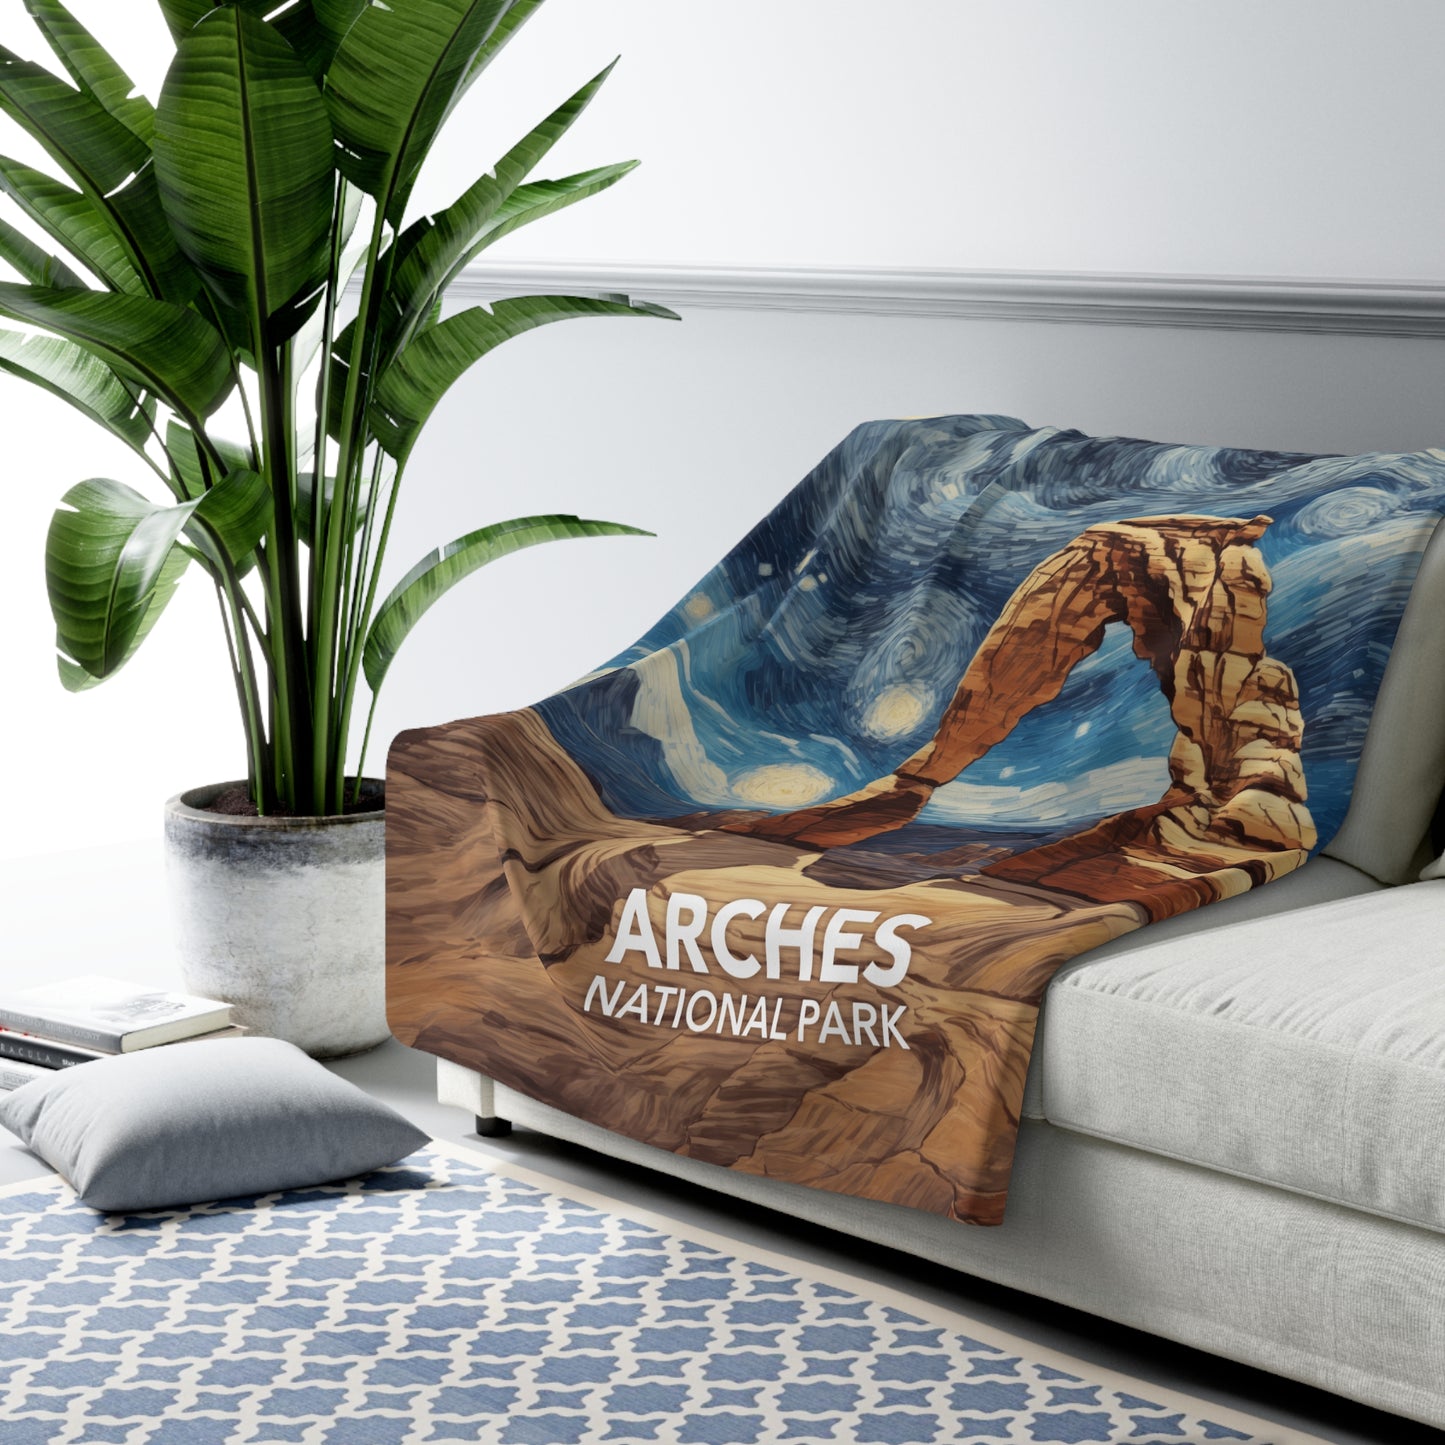 Arches National Park Sherpa Blanket - The Starry Night